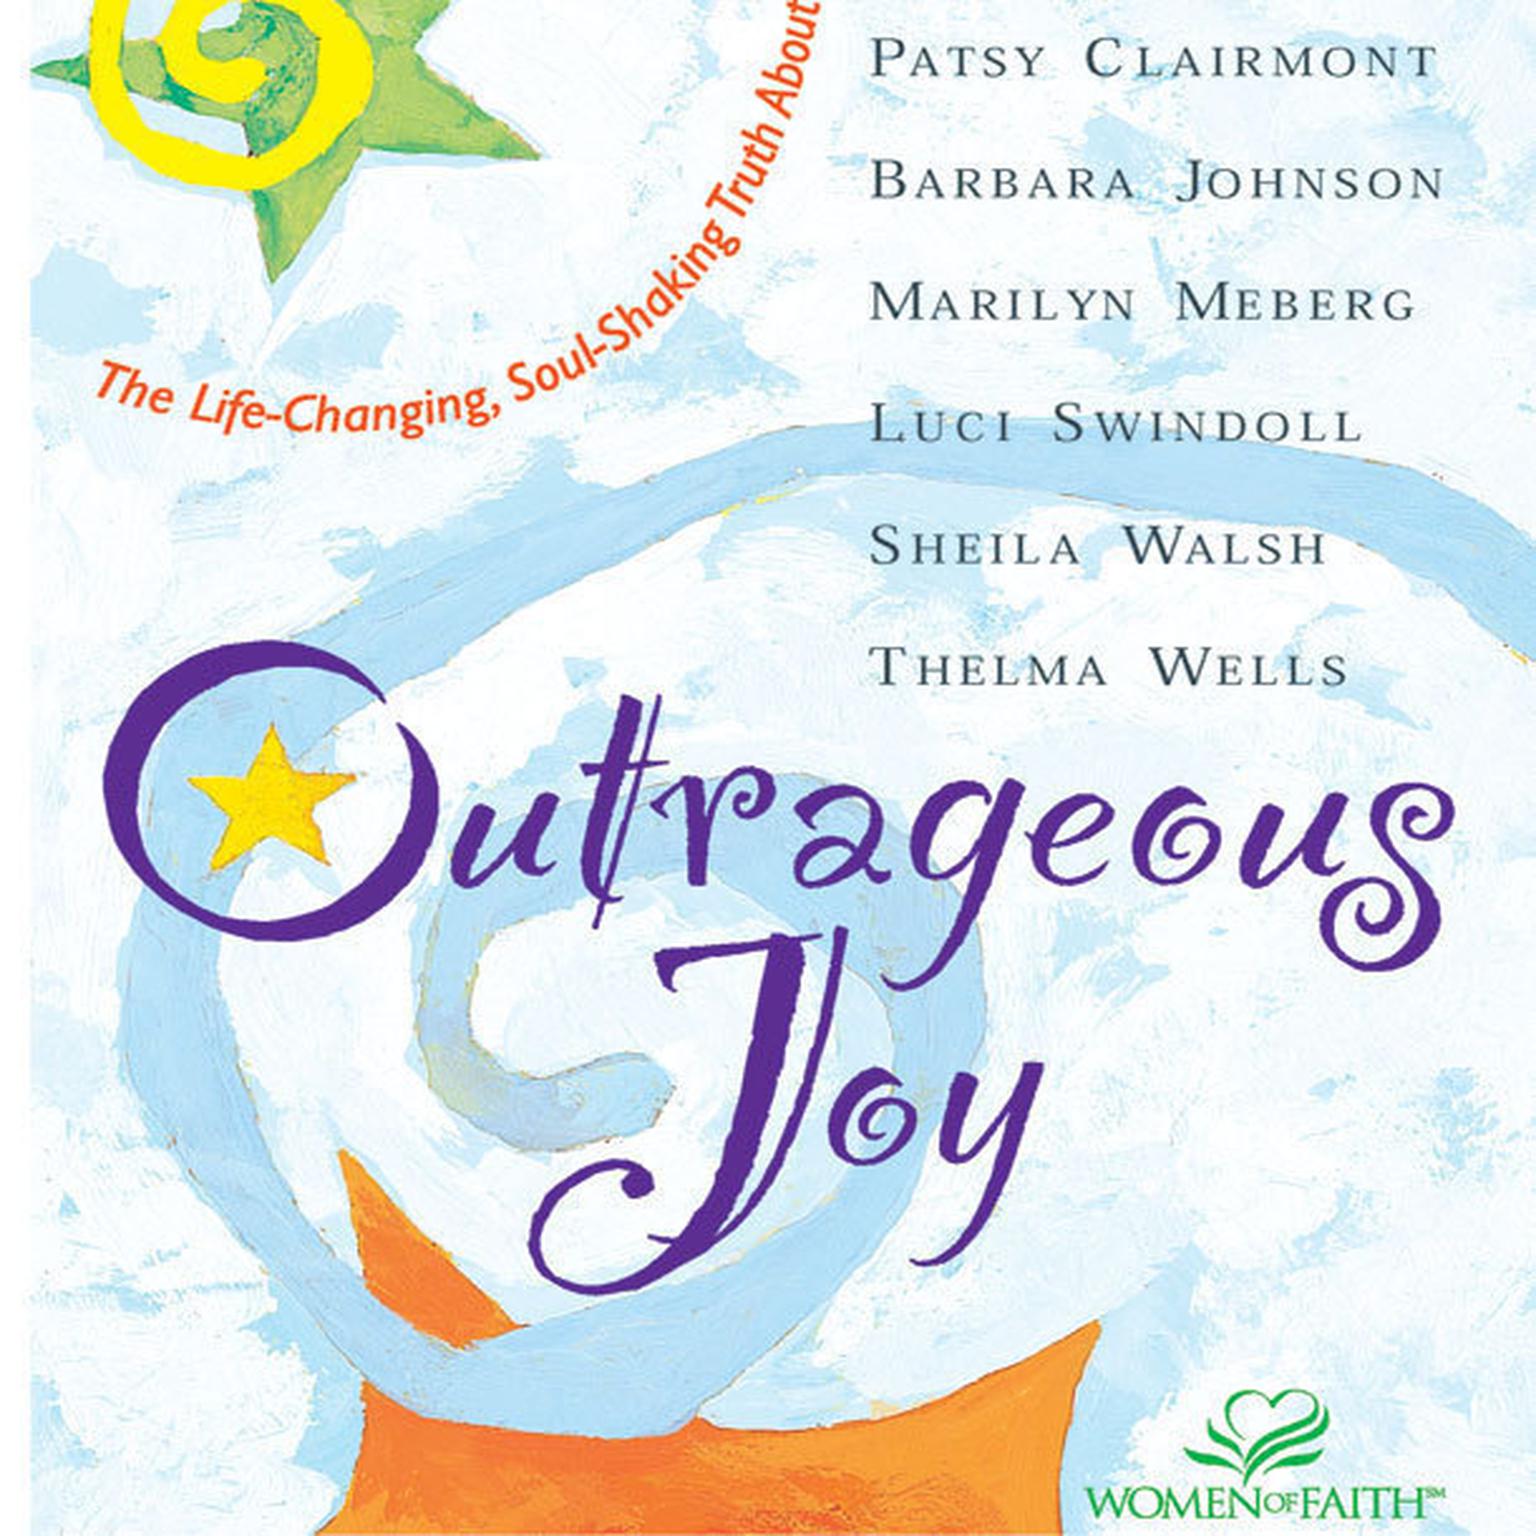 Outrageous Joy (Abridged): The Life-Changing, Soul-Shaking Truth About God Audiobook, by various authors